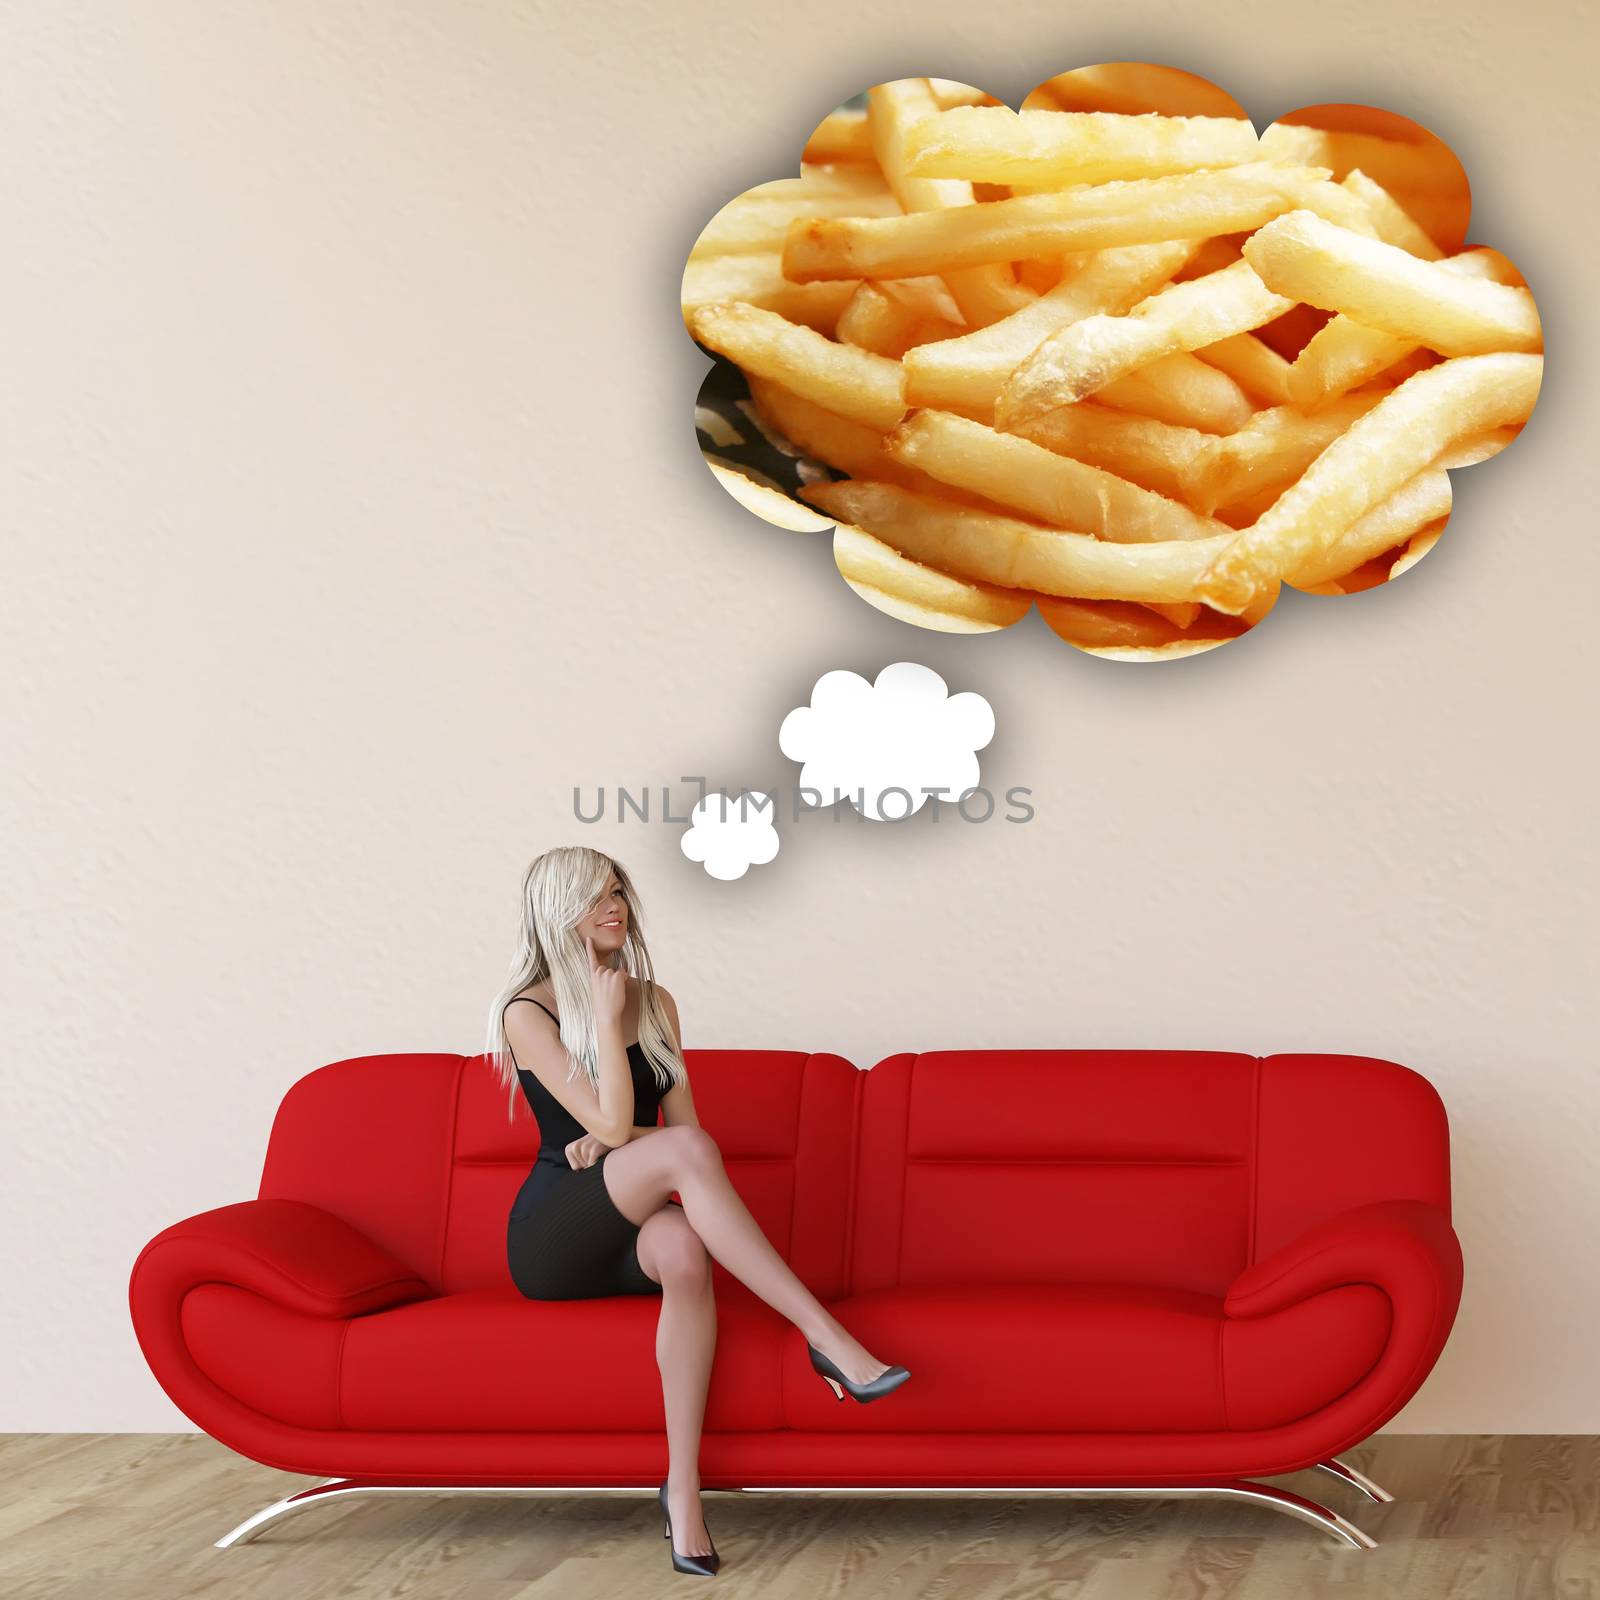 Woman Craving French Fries by kentoh